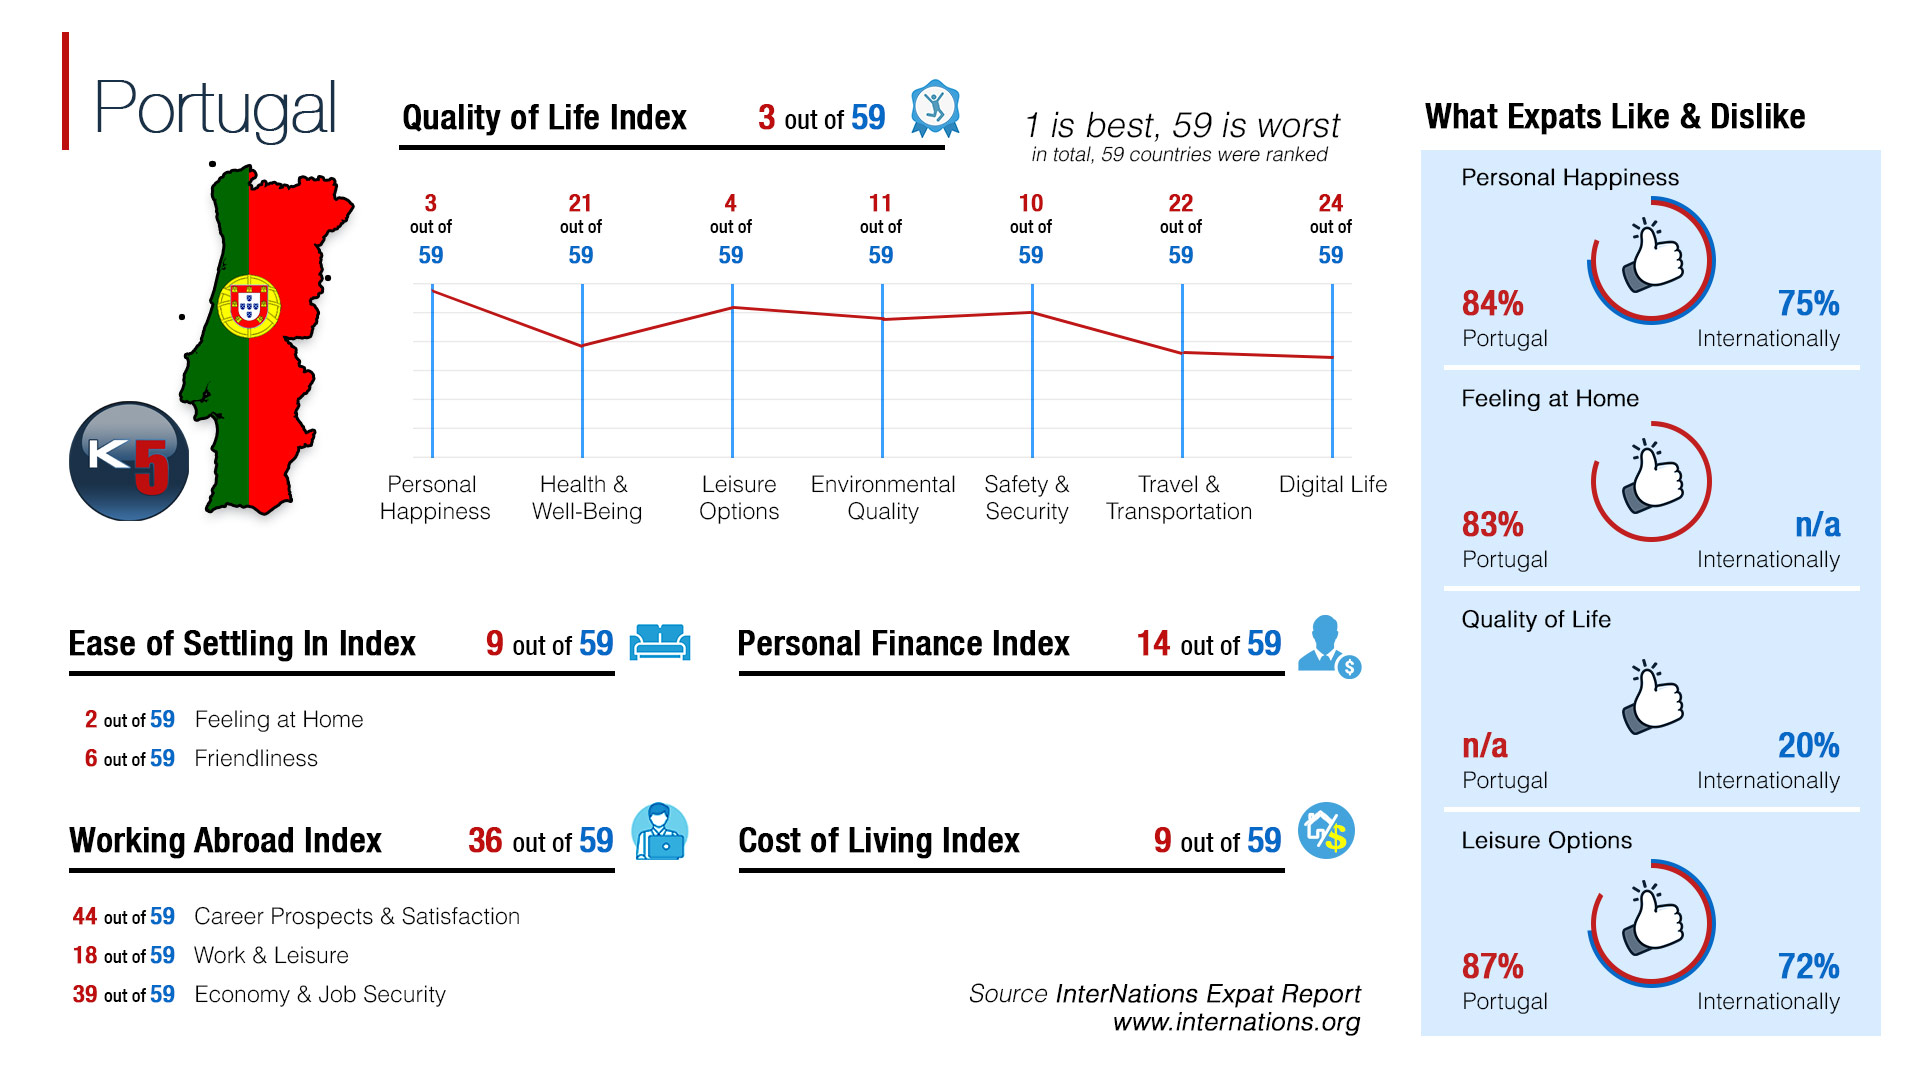 Quality of Life Index in Portugal